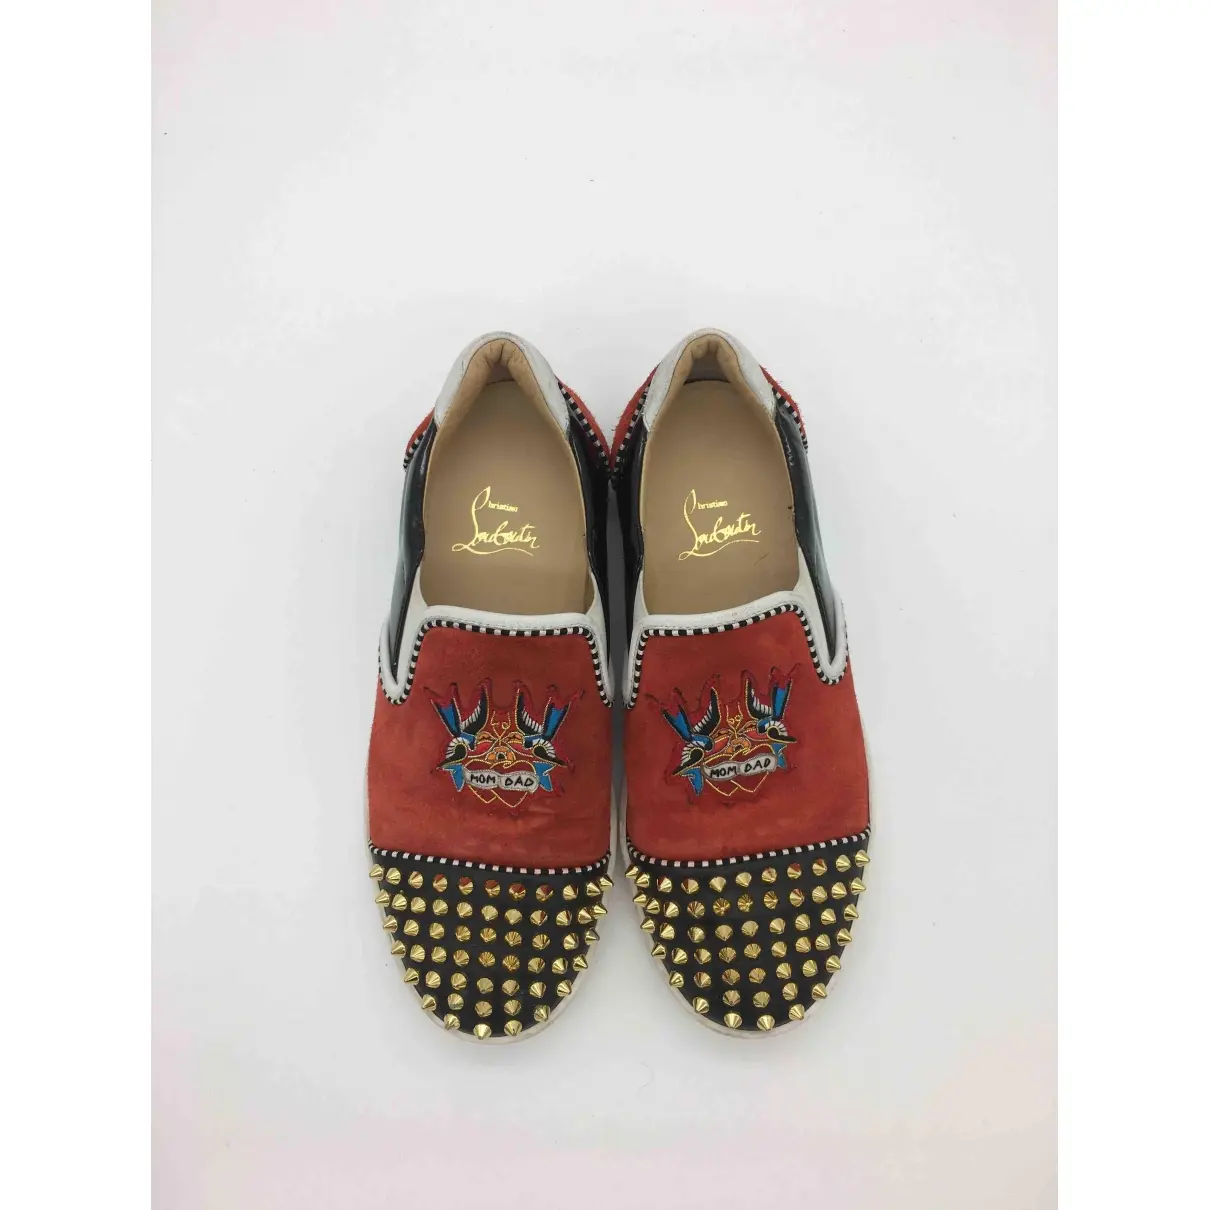 Christian Louboutin Roller Boat leather trainers for sale